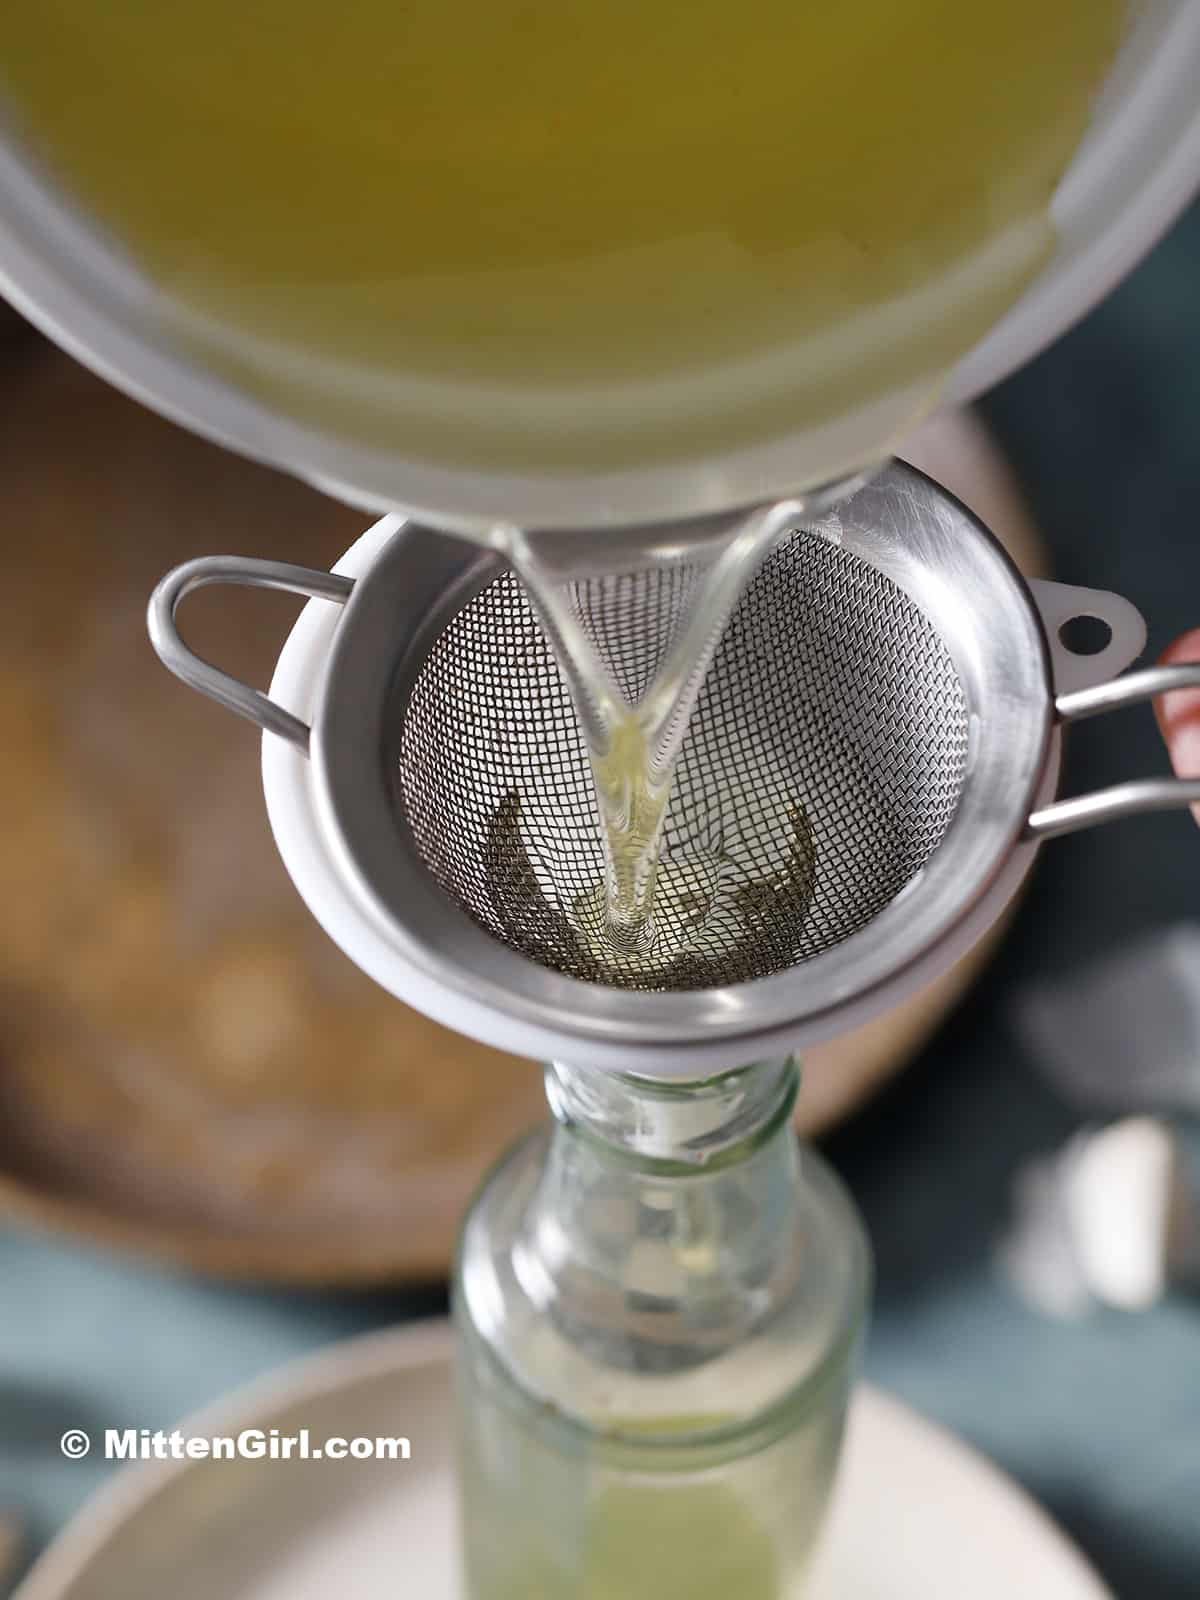 The oil from garlic confit being poured through a strainer into a bottle.